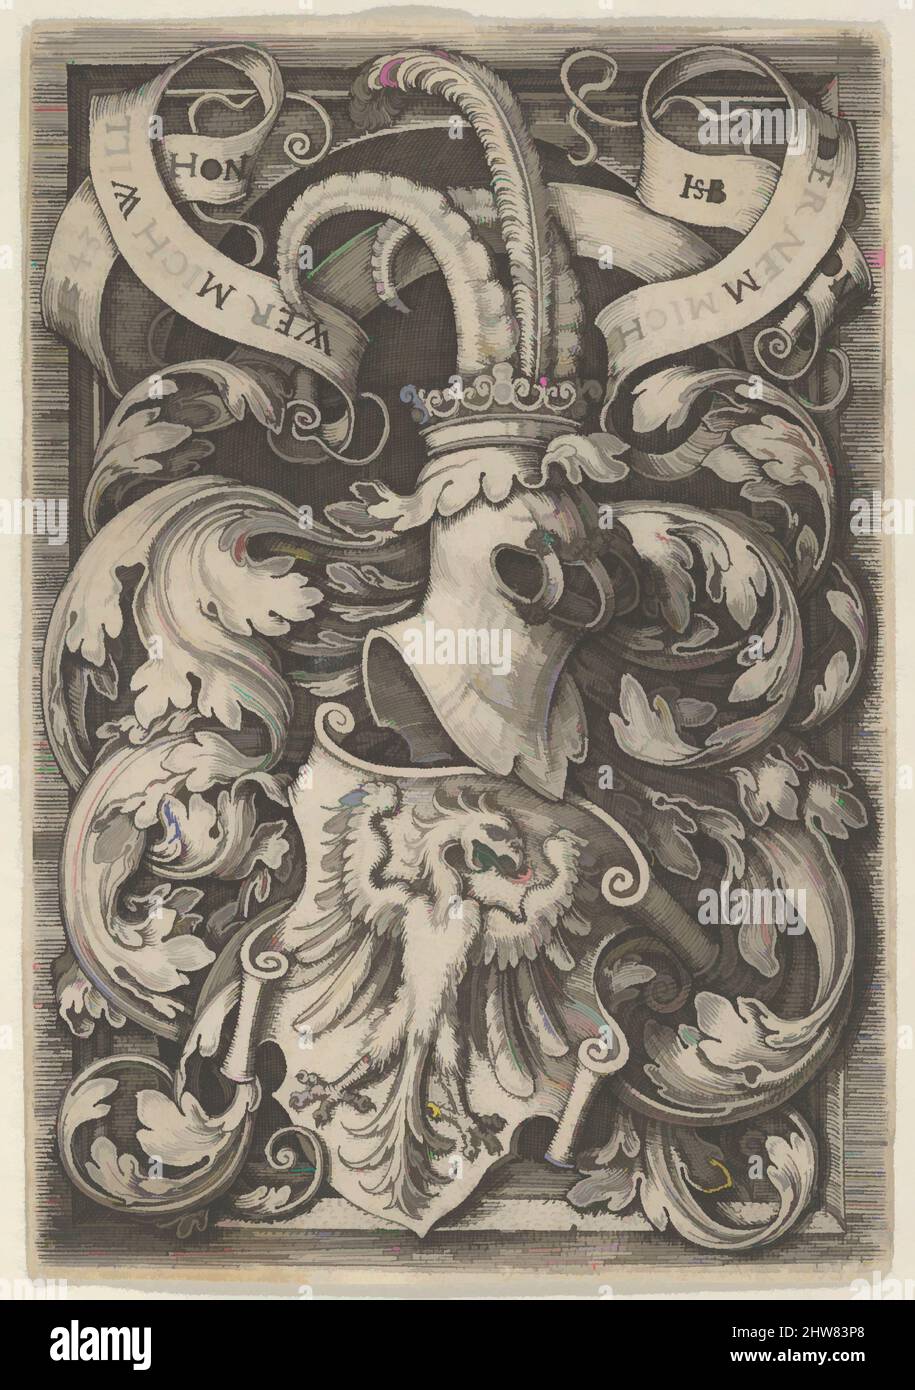 Art inspired by Coat of Arms with an Eagle Surrounded by Foliage, 1543, Engraving, Sheet: 2 7/8 x 2 in. (7.3 x 5.1 cm), Sebald Beham (German, Nuremberg 1500–1550 Frankfurt), Design for a coat of arms with an eagle. Above the escutcheon, a crowned helm with ibex horns and a feather, Classic works modernized by Artotop with a splash of modernity. Shapes, color and value, eye-catching visual impact on art. Emotions through freedom of artworks in a contemporary way. A timeless message pursuing a wildly creative new direction. Artists turning to the digital medium and creating the Artotop NFT Stock Photo